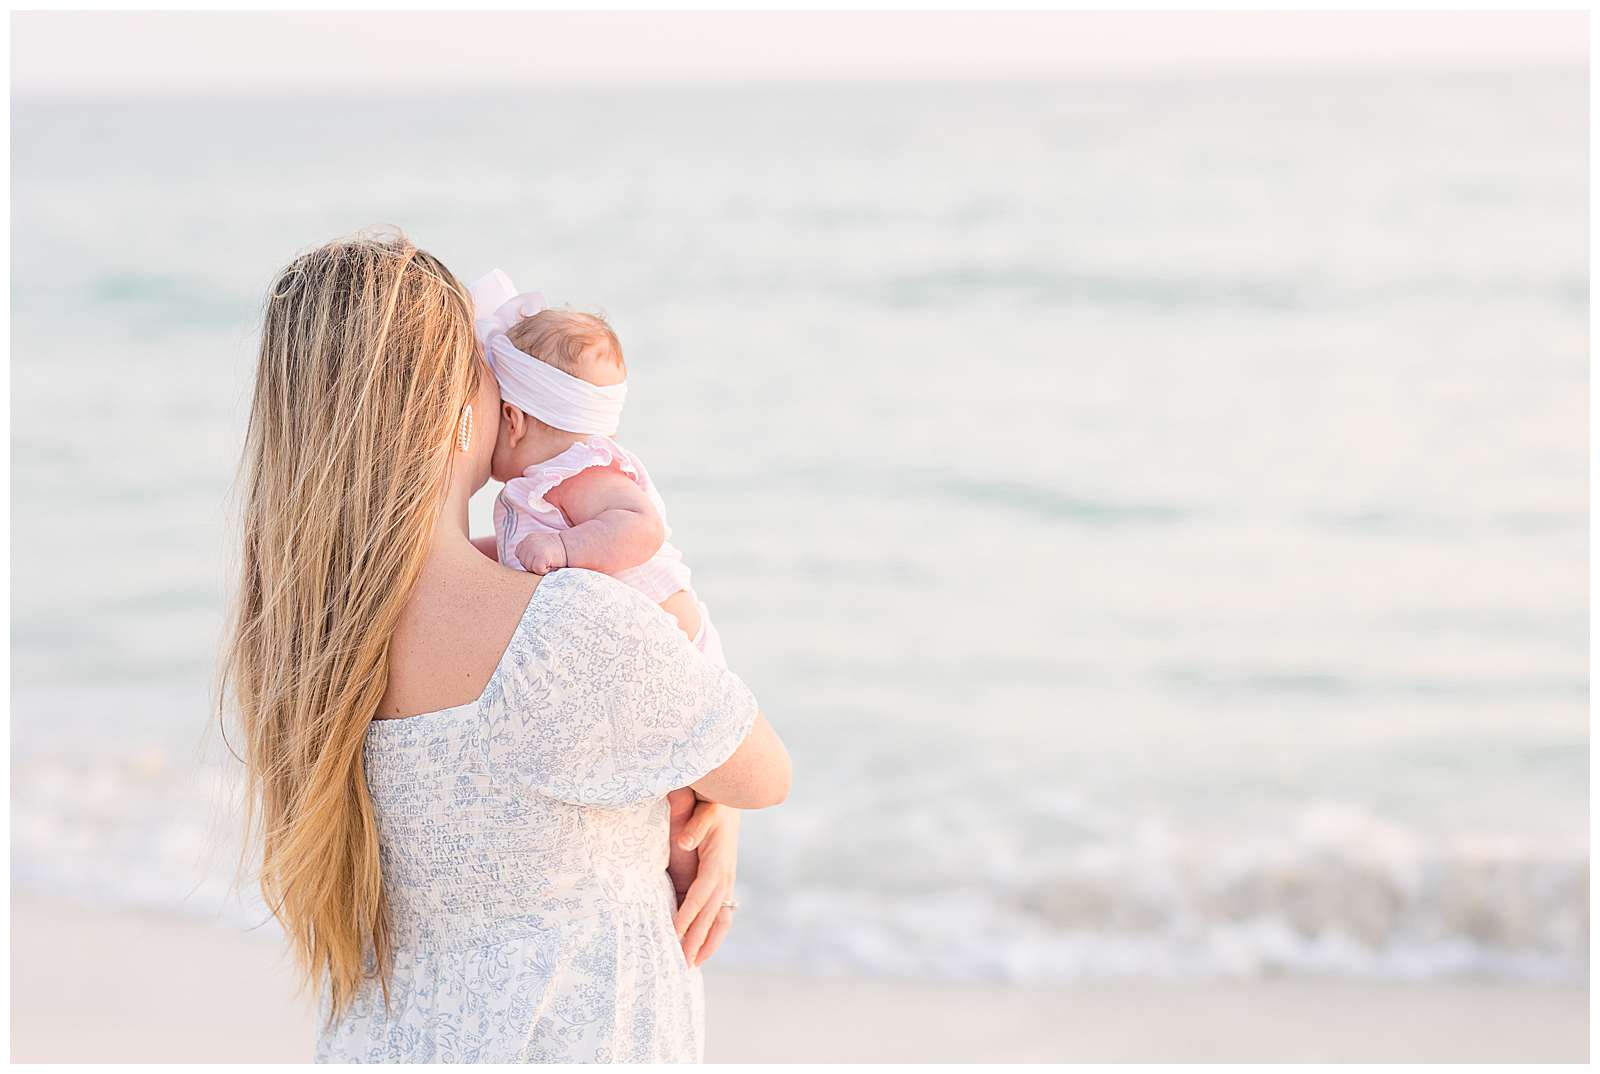 Sweet image taken by Rosemary Beach photographer, Rebecca Rice, captures the beach in the background and new mom, who holds her baby girl to her cheek, looking out at the beautiful beach at sunset.  Click to see more from this beach session on the blog! -rebeccaricephoto.com